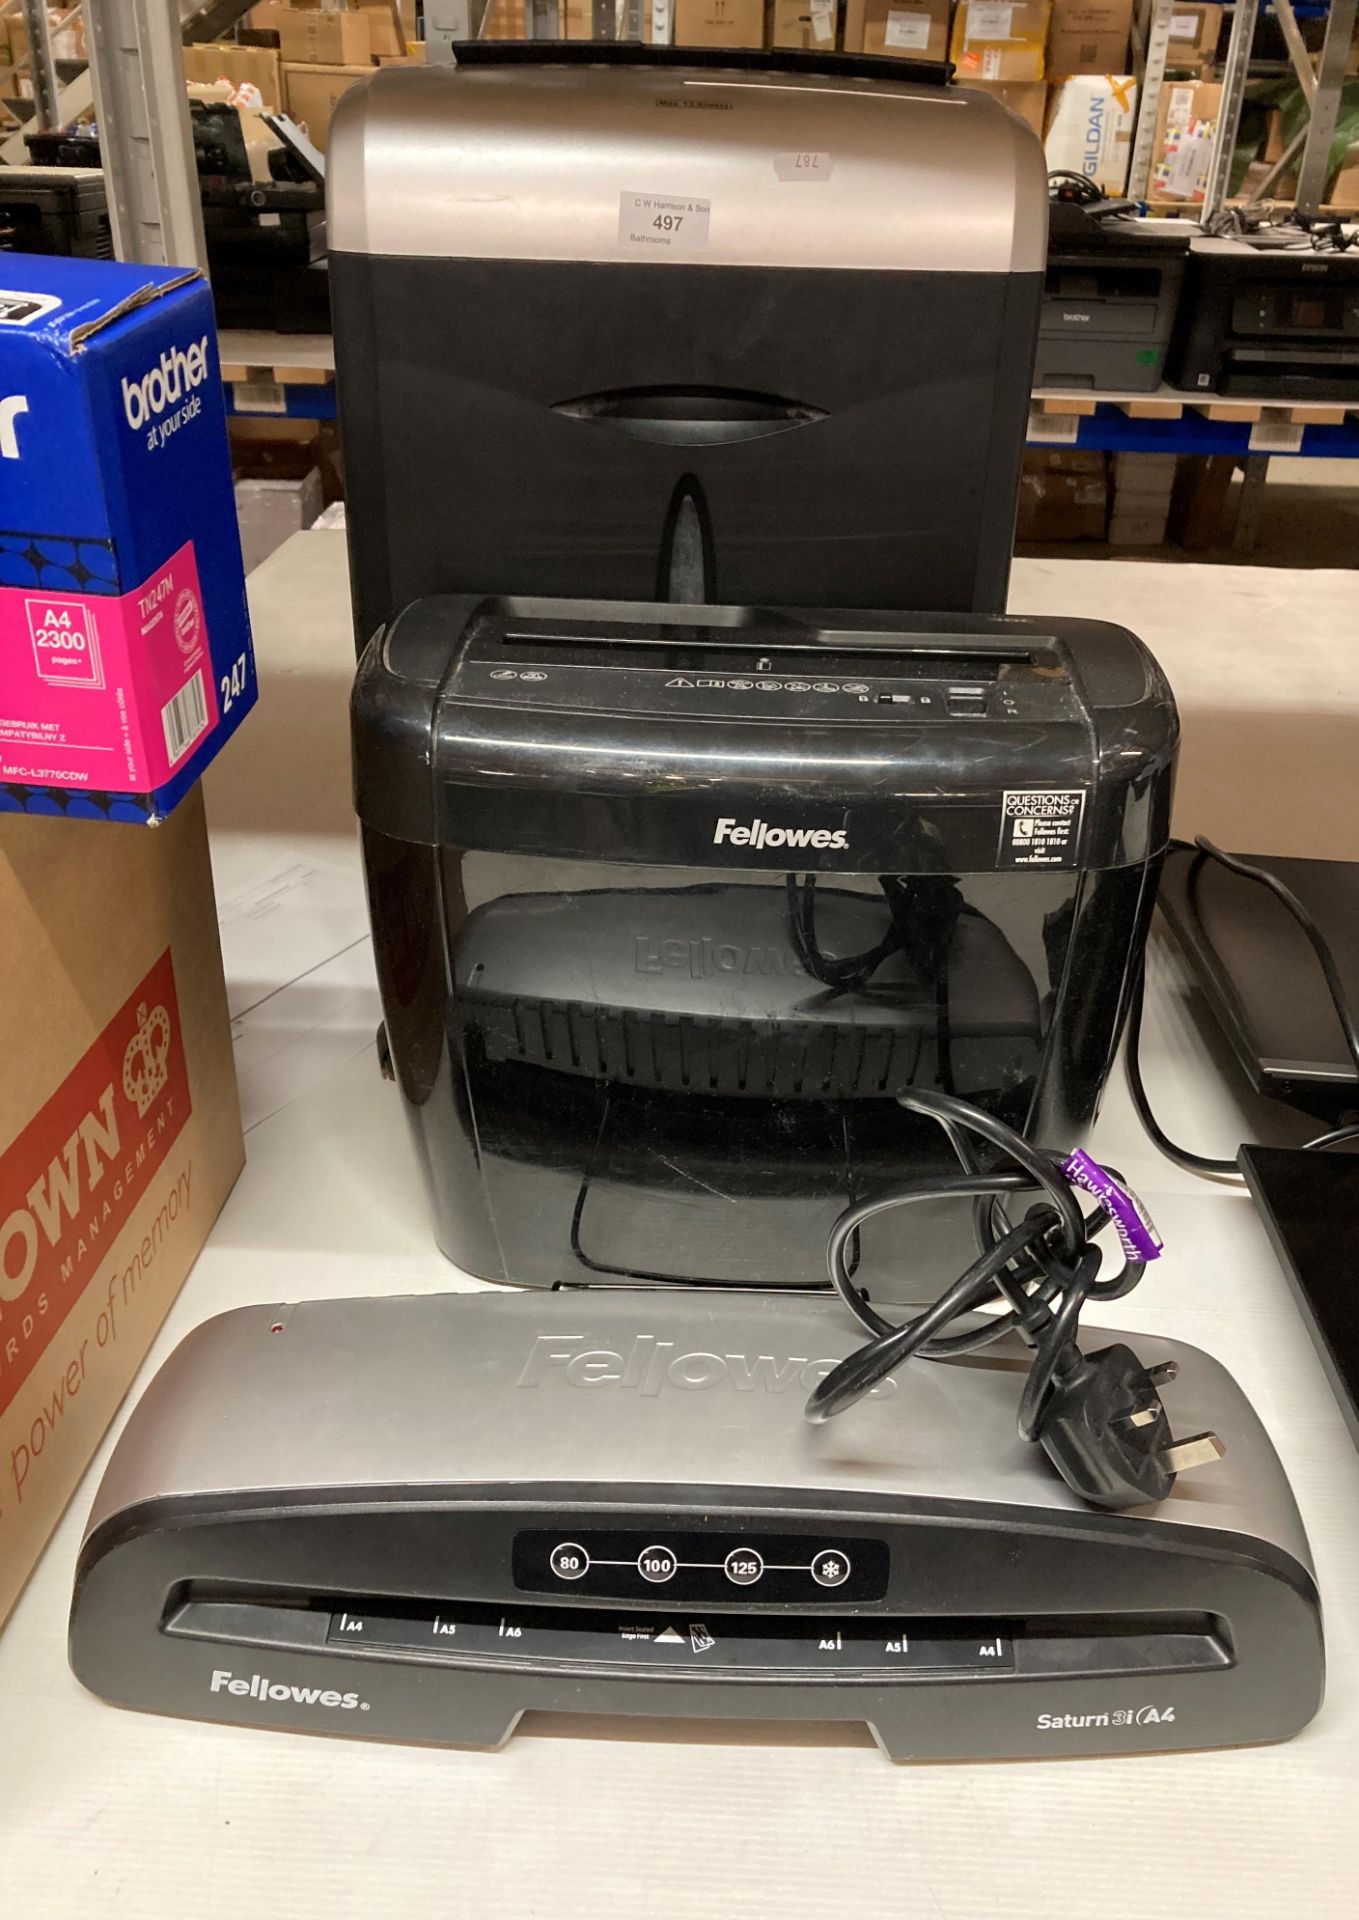 3 x items - Aurora and Fellowes paper shredders and a Fellowes laminator (saleroom location: L12)